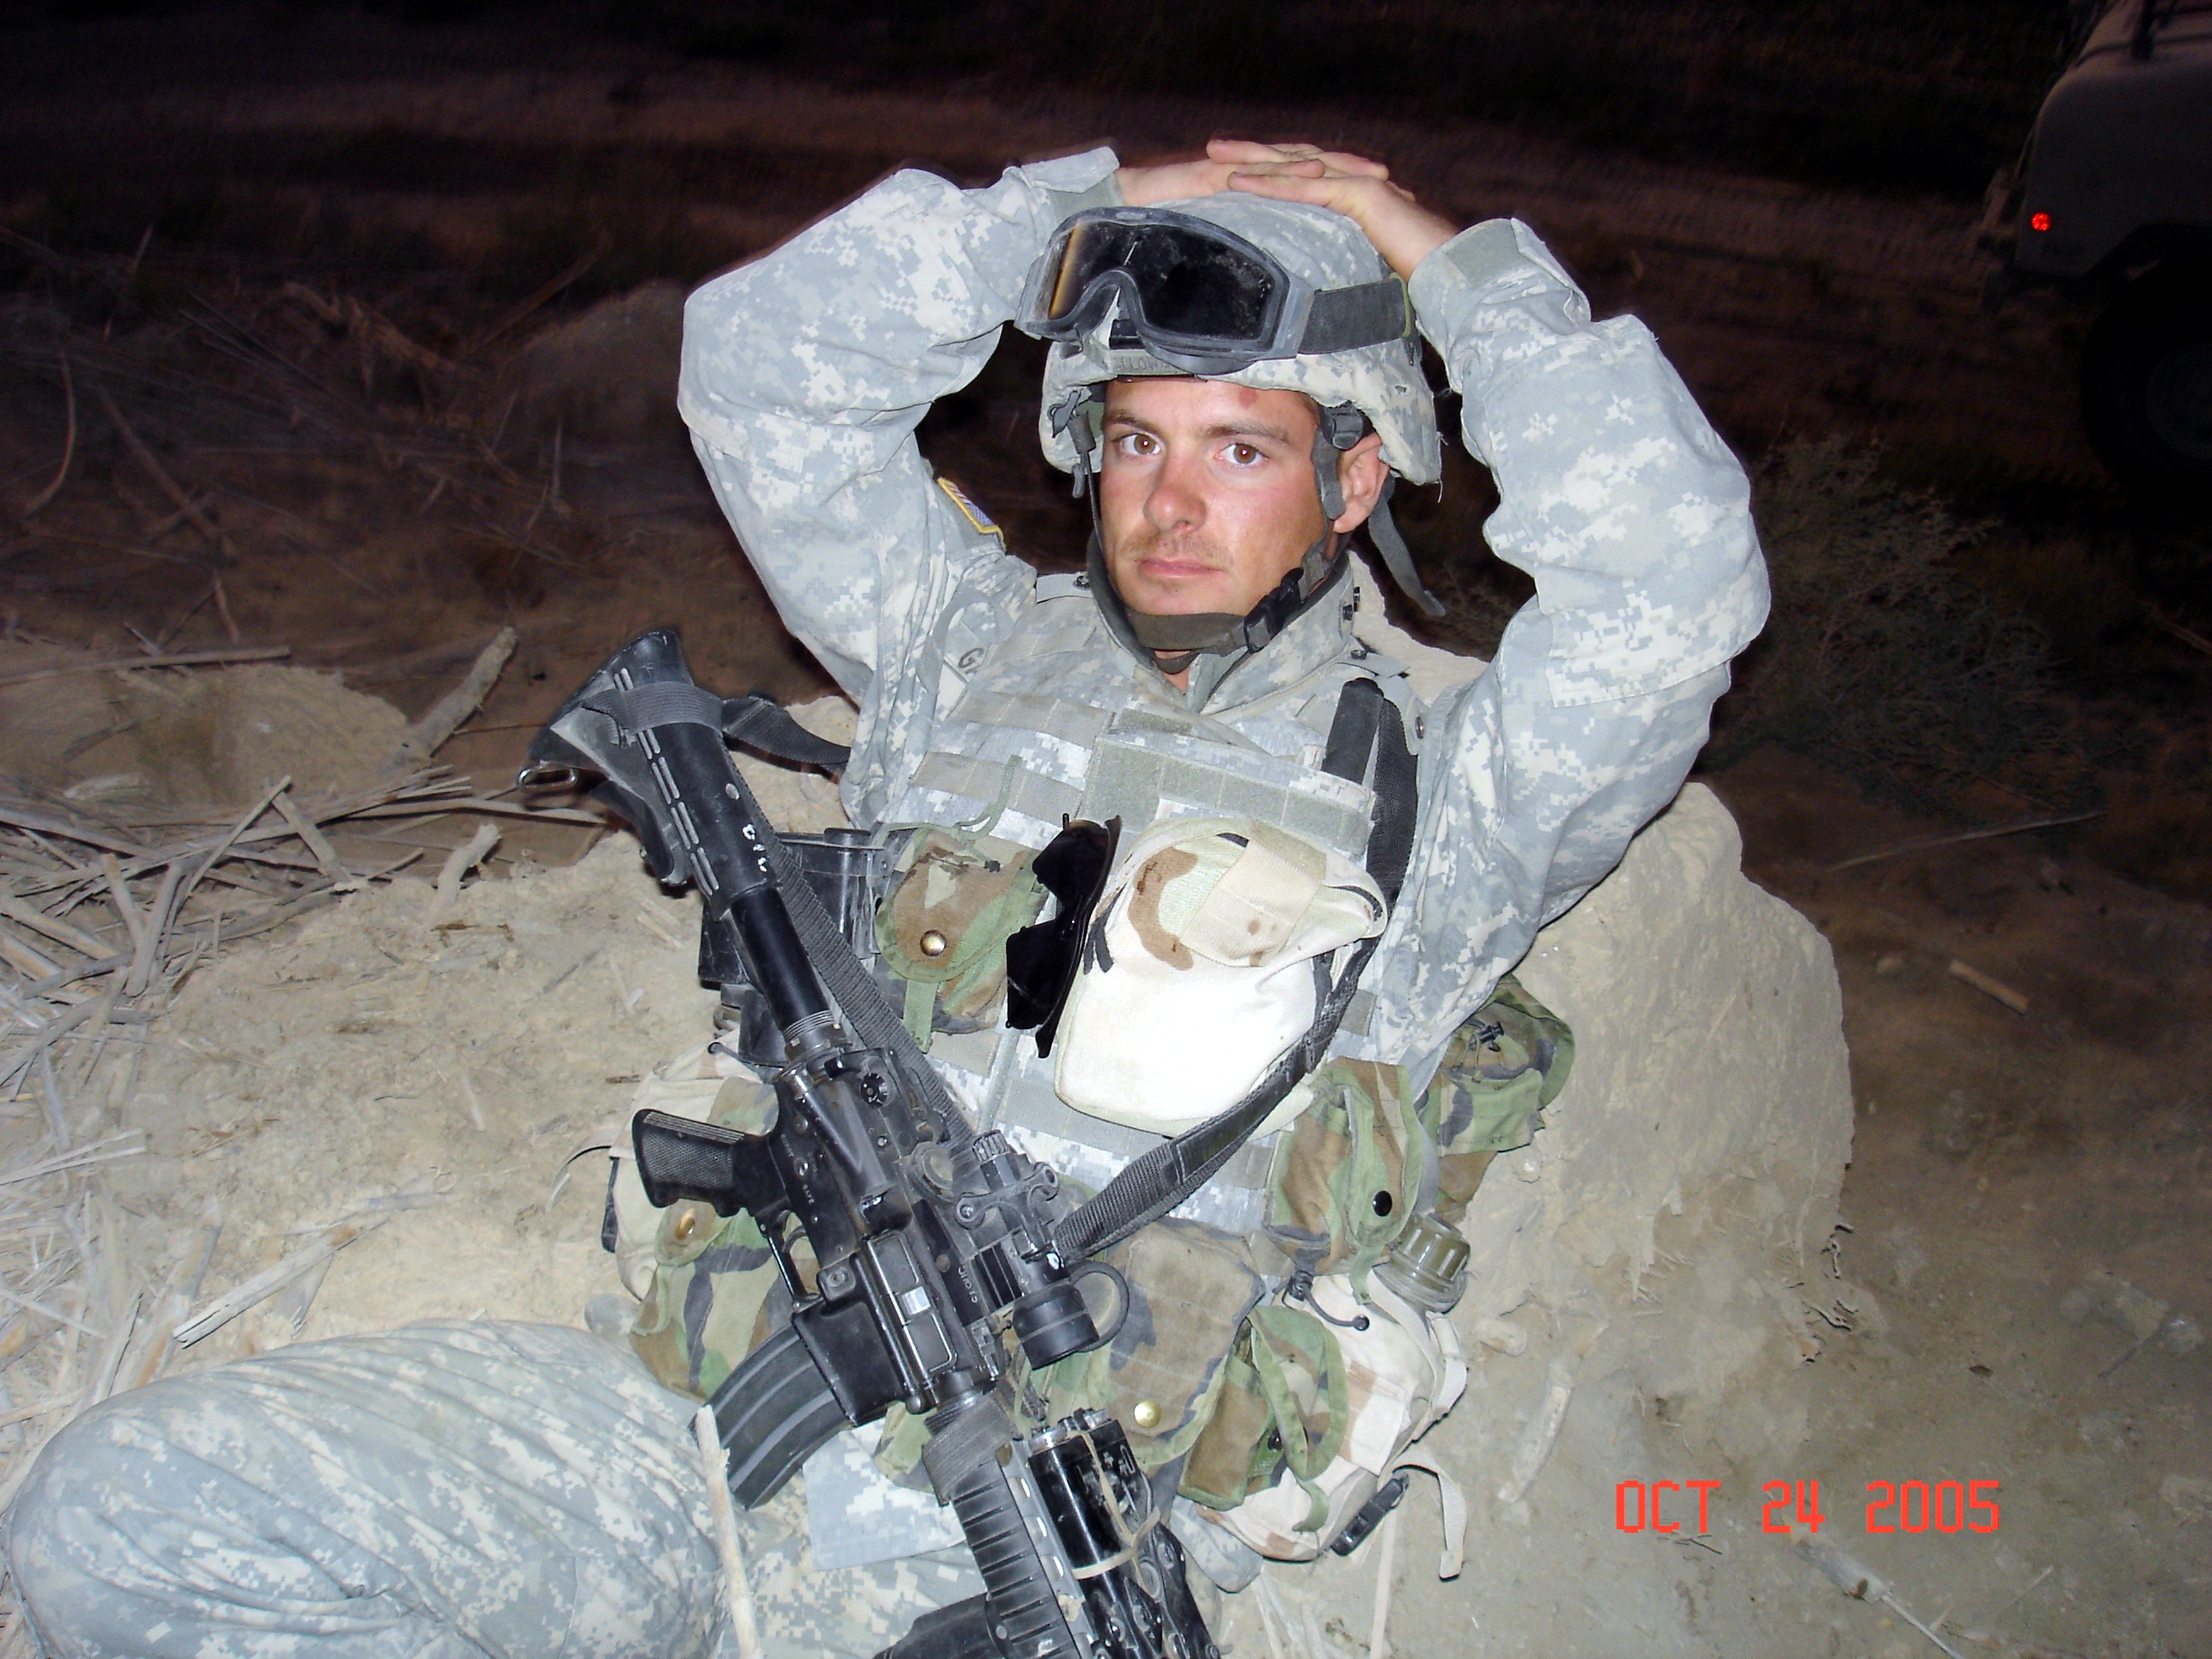 Sgt. Galloway in Iraq with the 101st Airborne, Oct. 24, 2005. (Photo courtesy Noah Galloway)